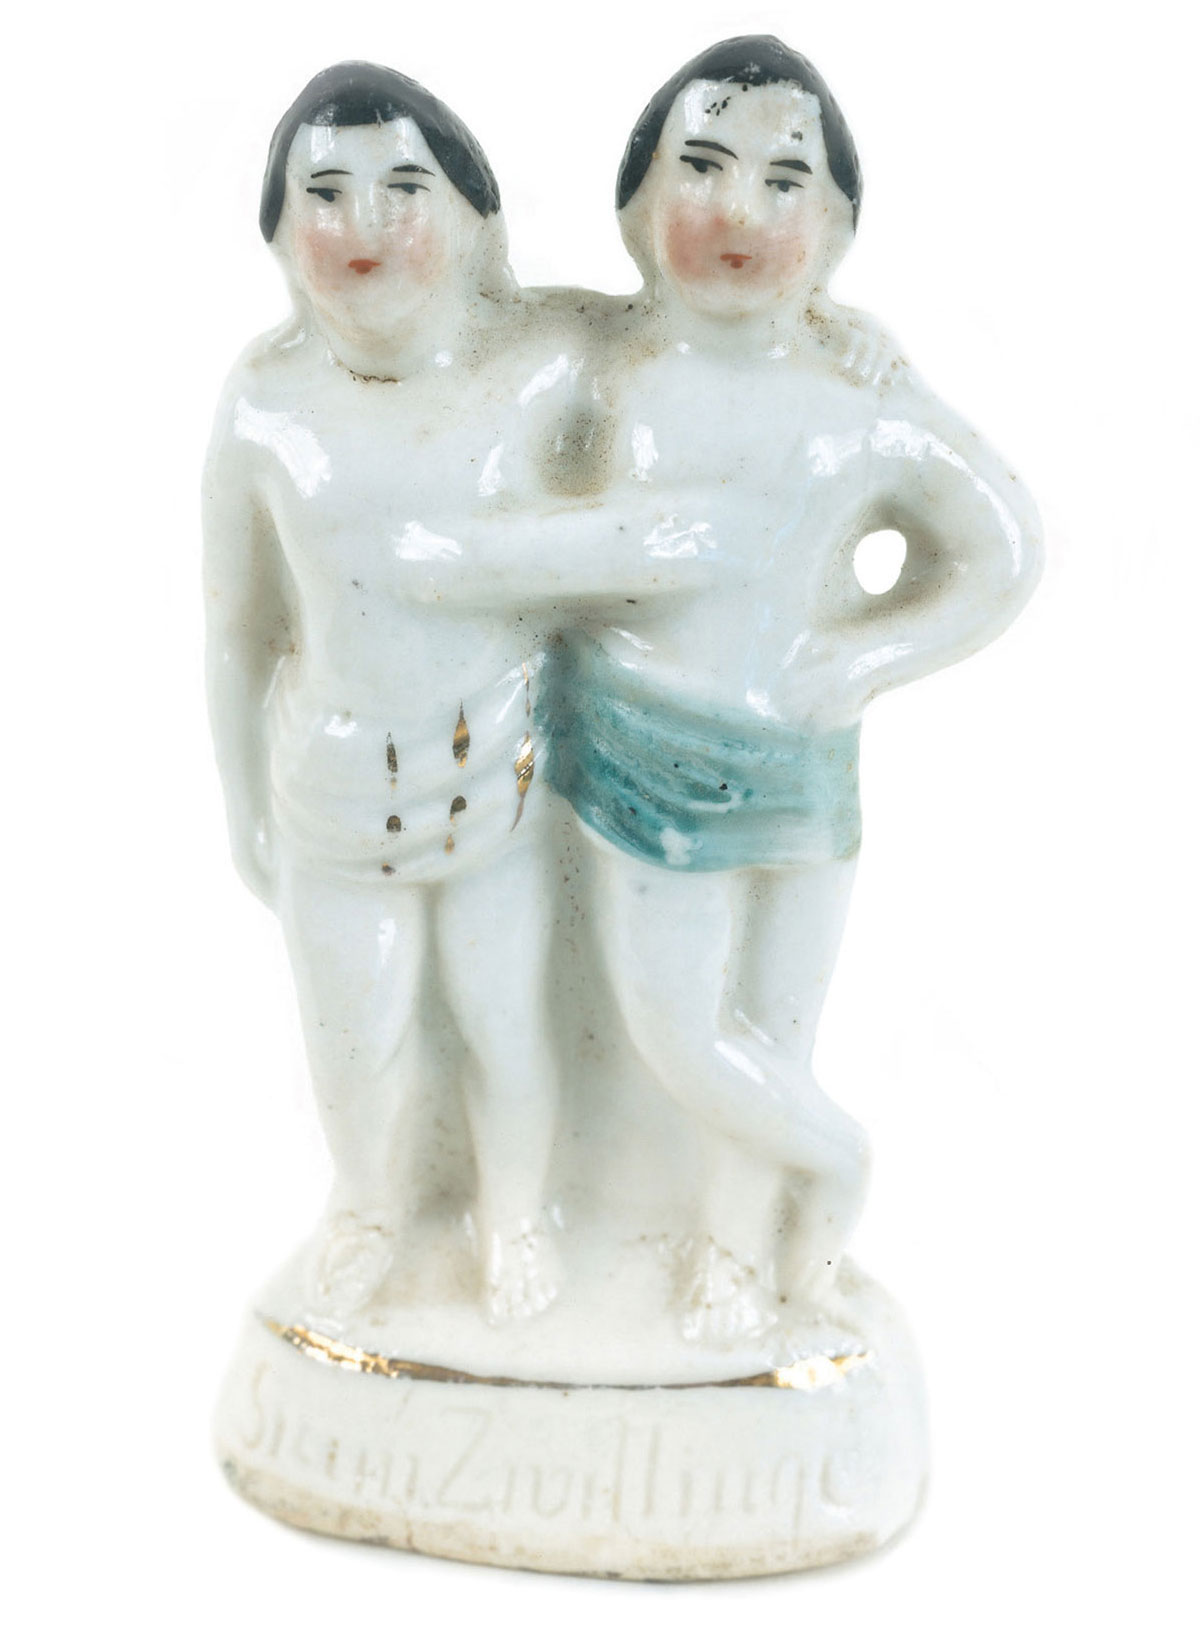 A photograph of a porcelain figurine of the conjoined twins Chang and Eng.